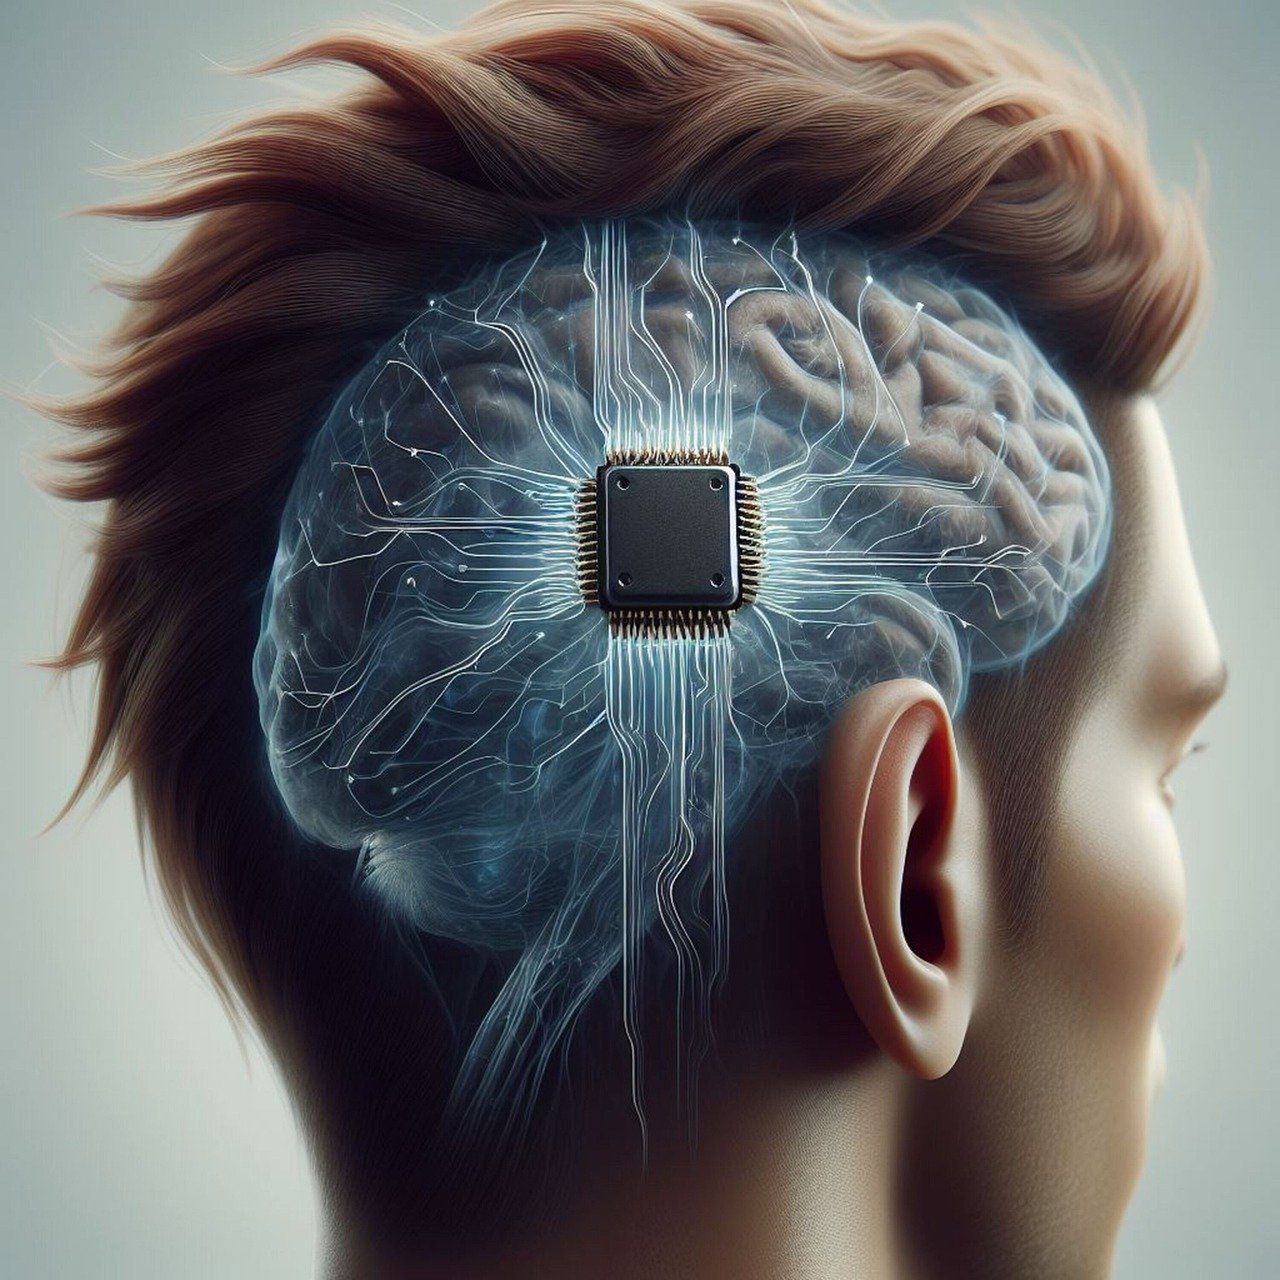 Neuralink's breakthrough and setbacks: A glimpse into the future of brain implants